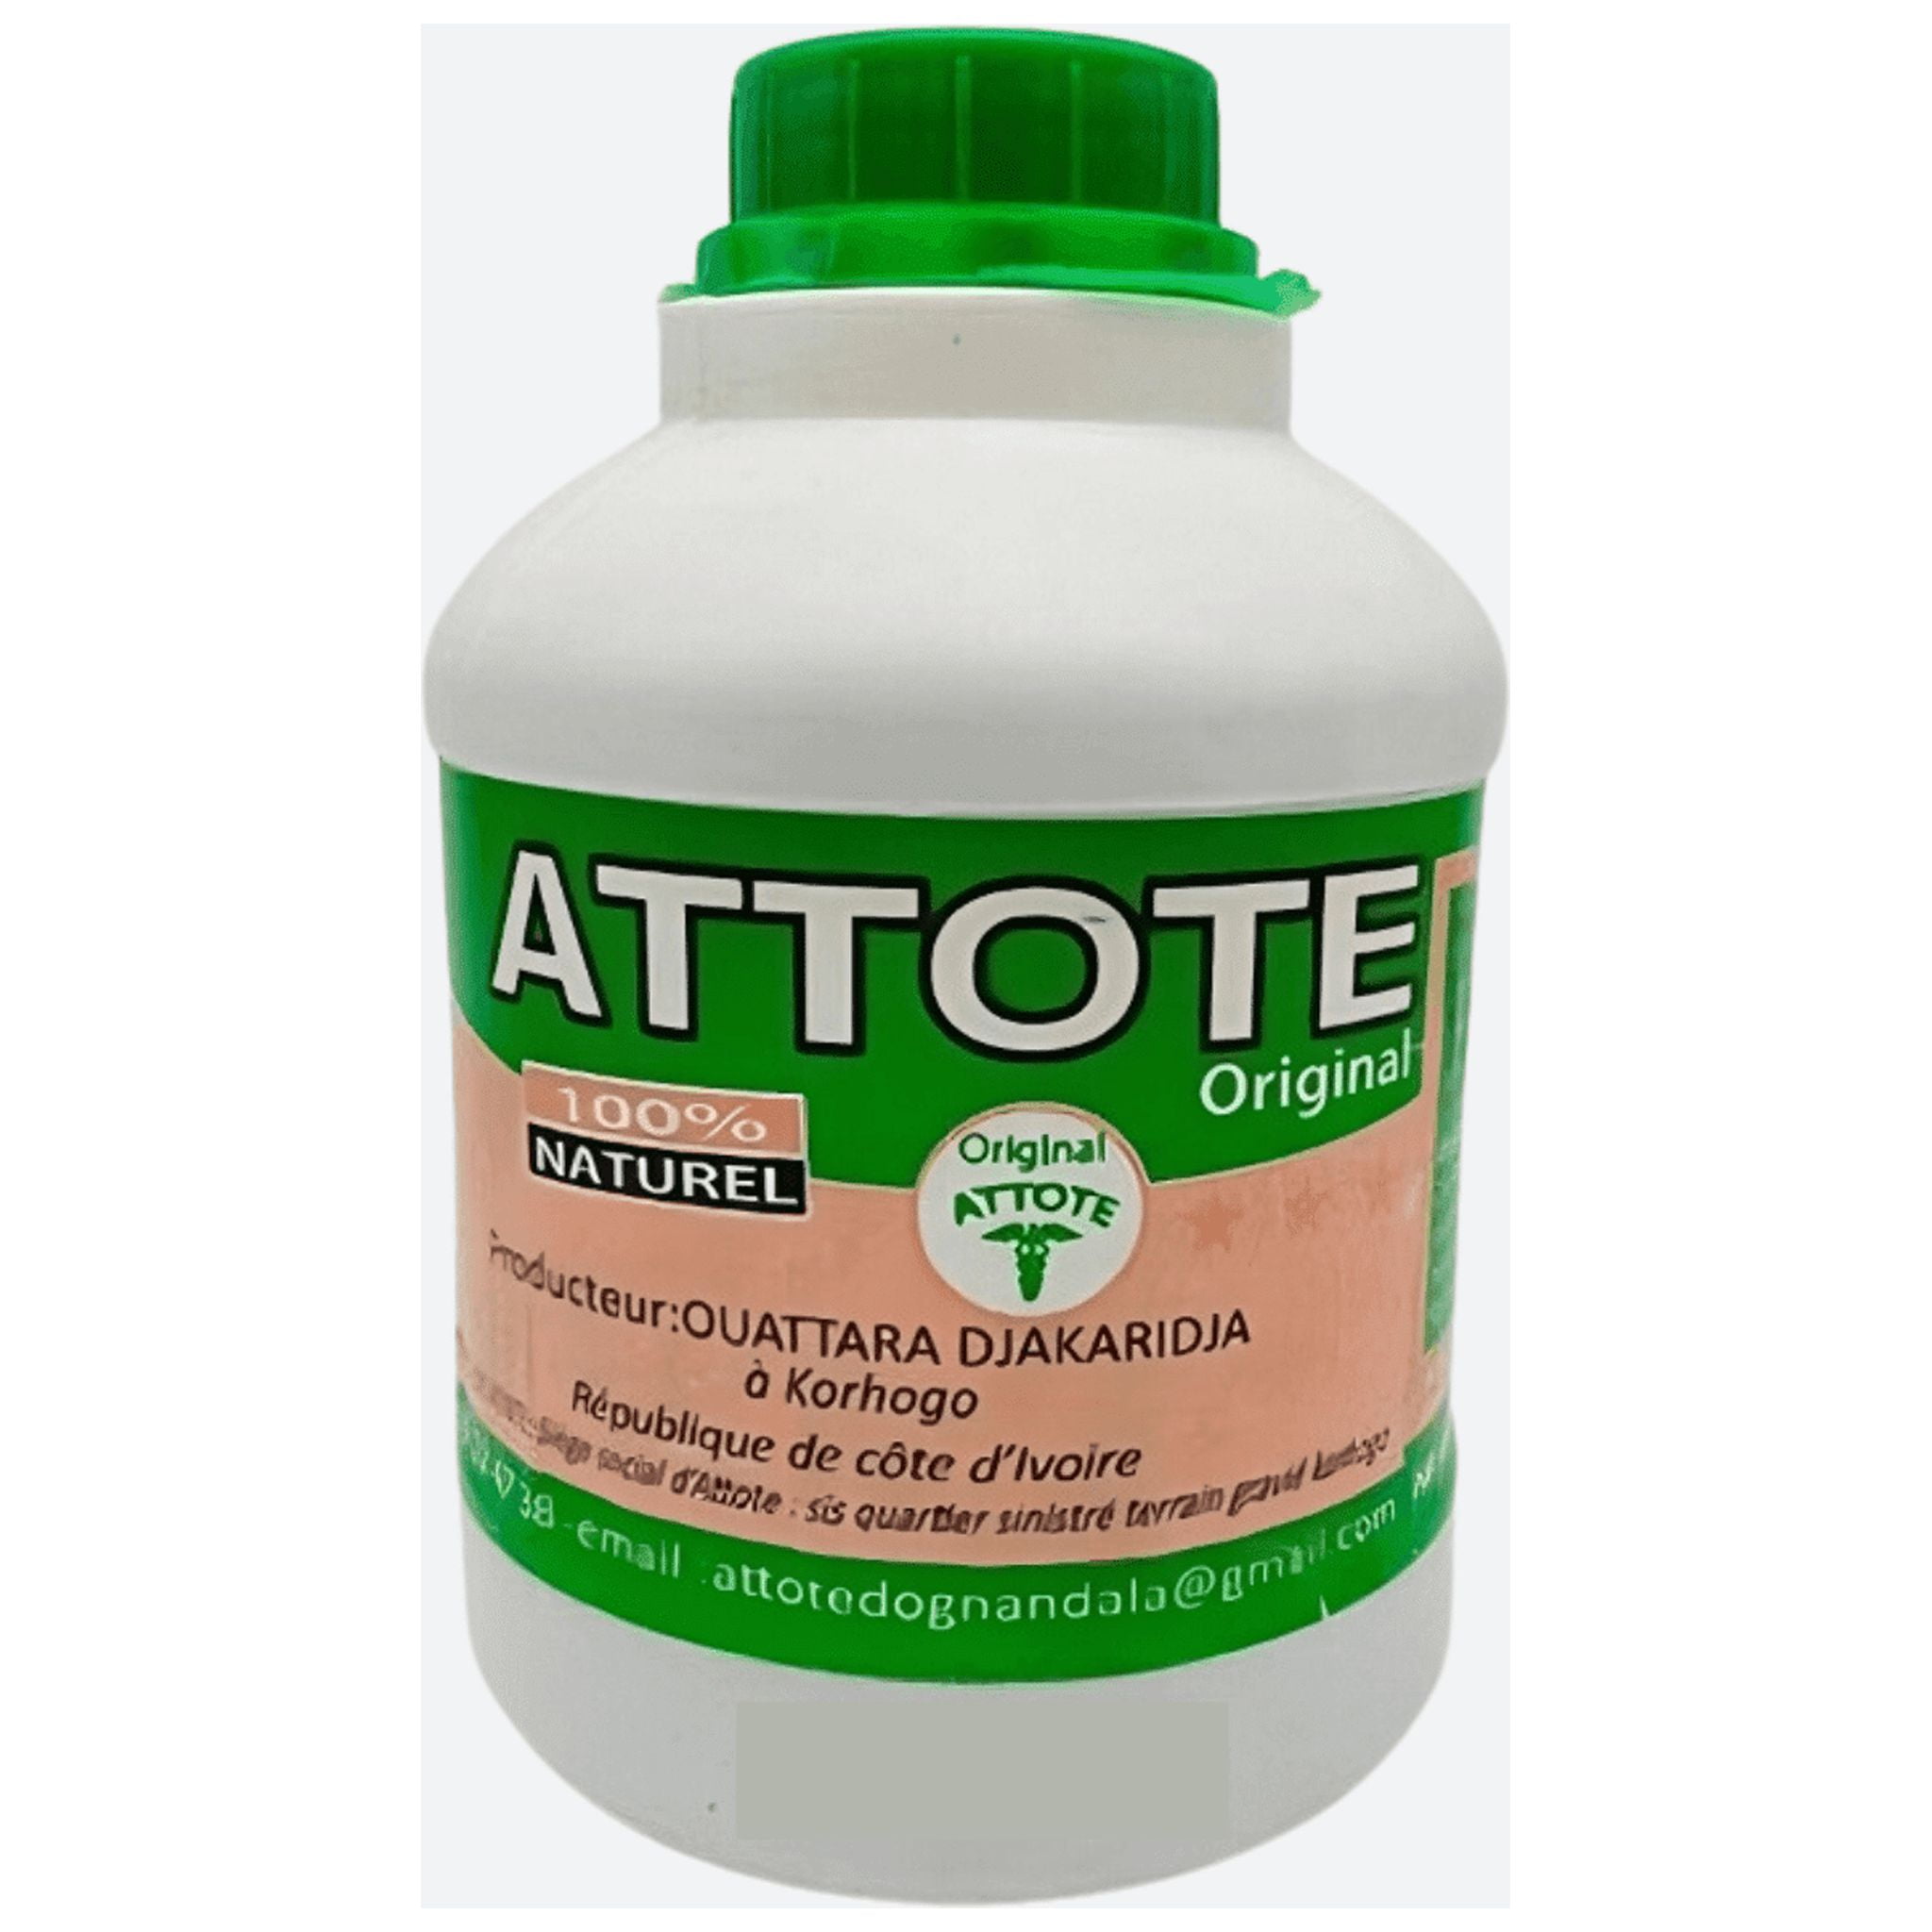 Attote Herbal Bitters Drinks